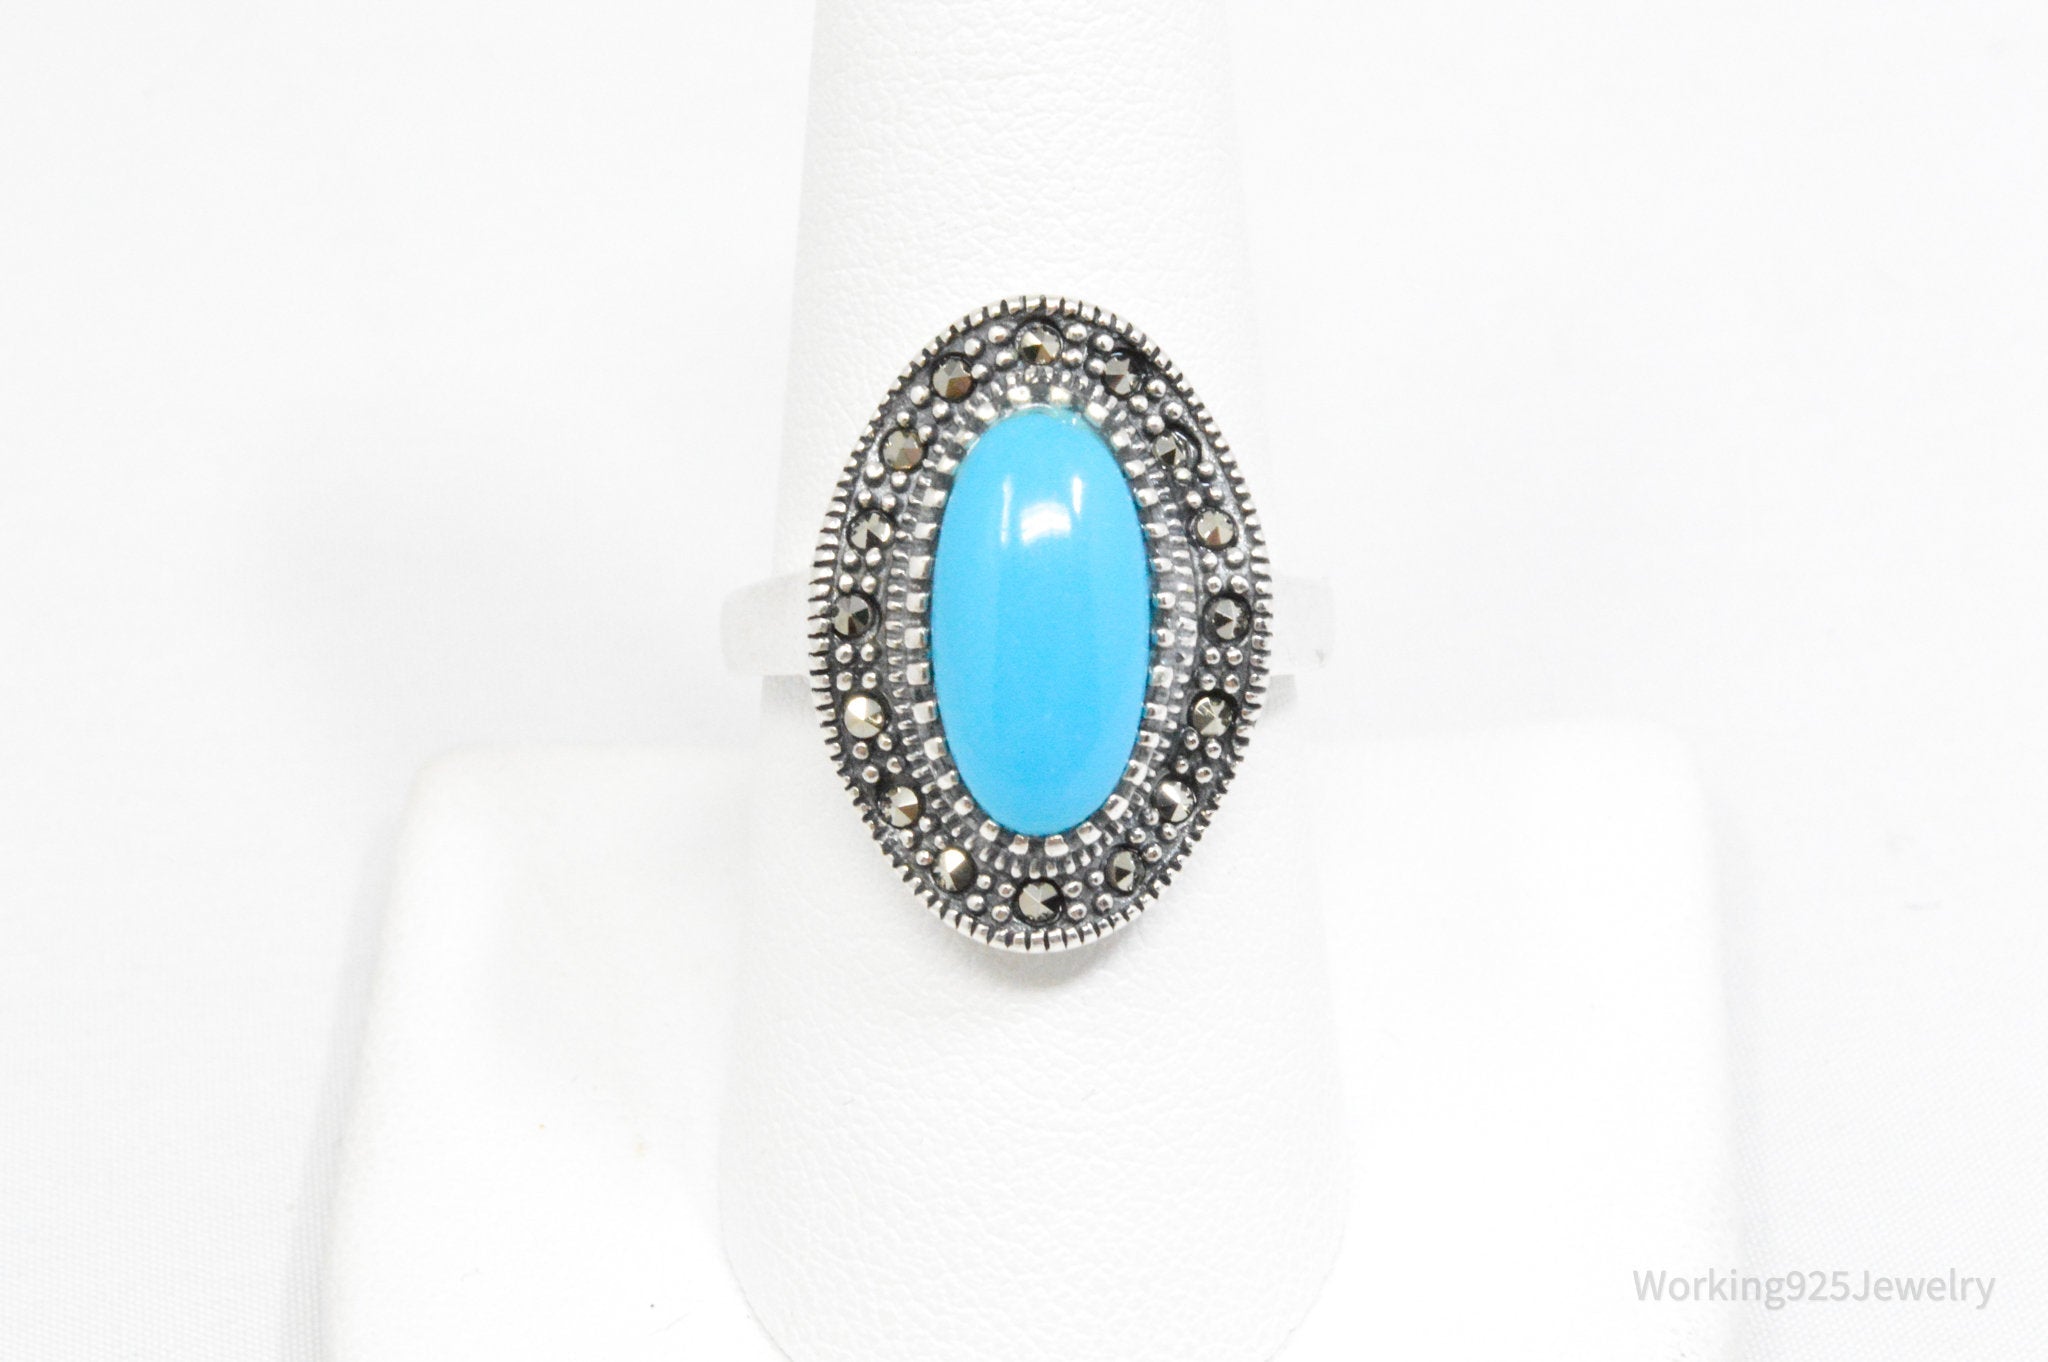 Vintage Art Deco Large Turquoise Marcasite Sterling Silver Ring - Sz 8.5